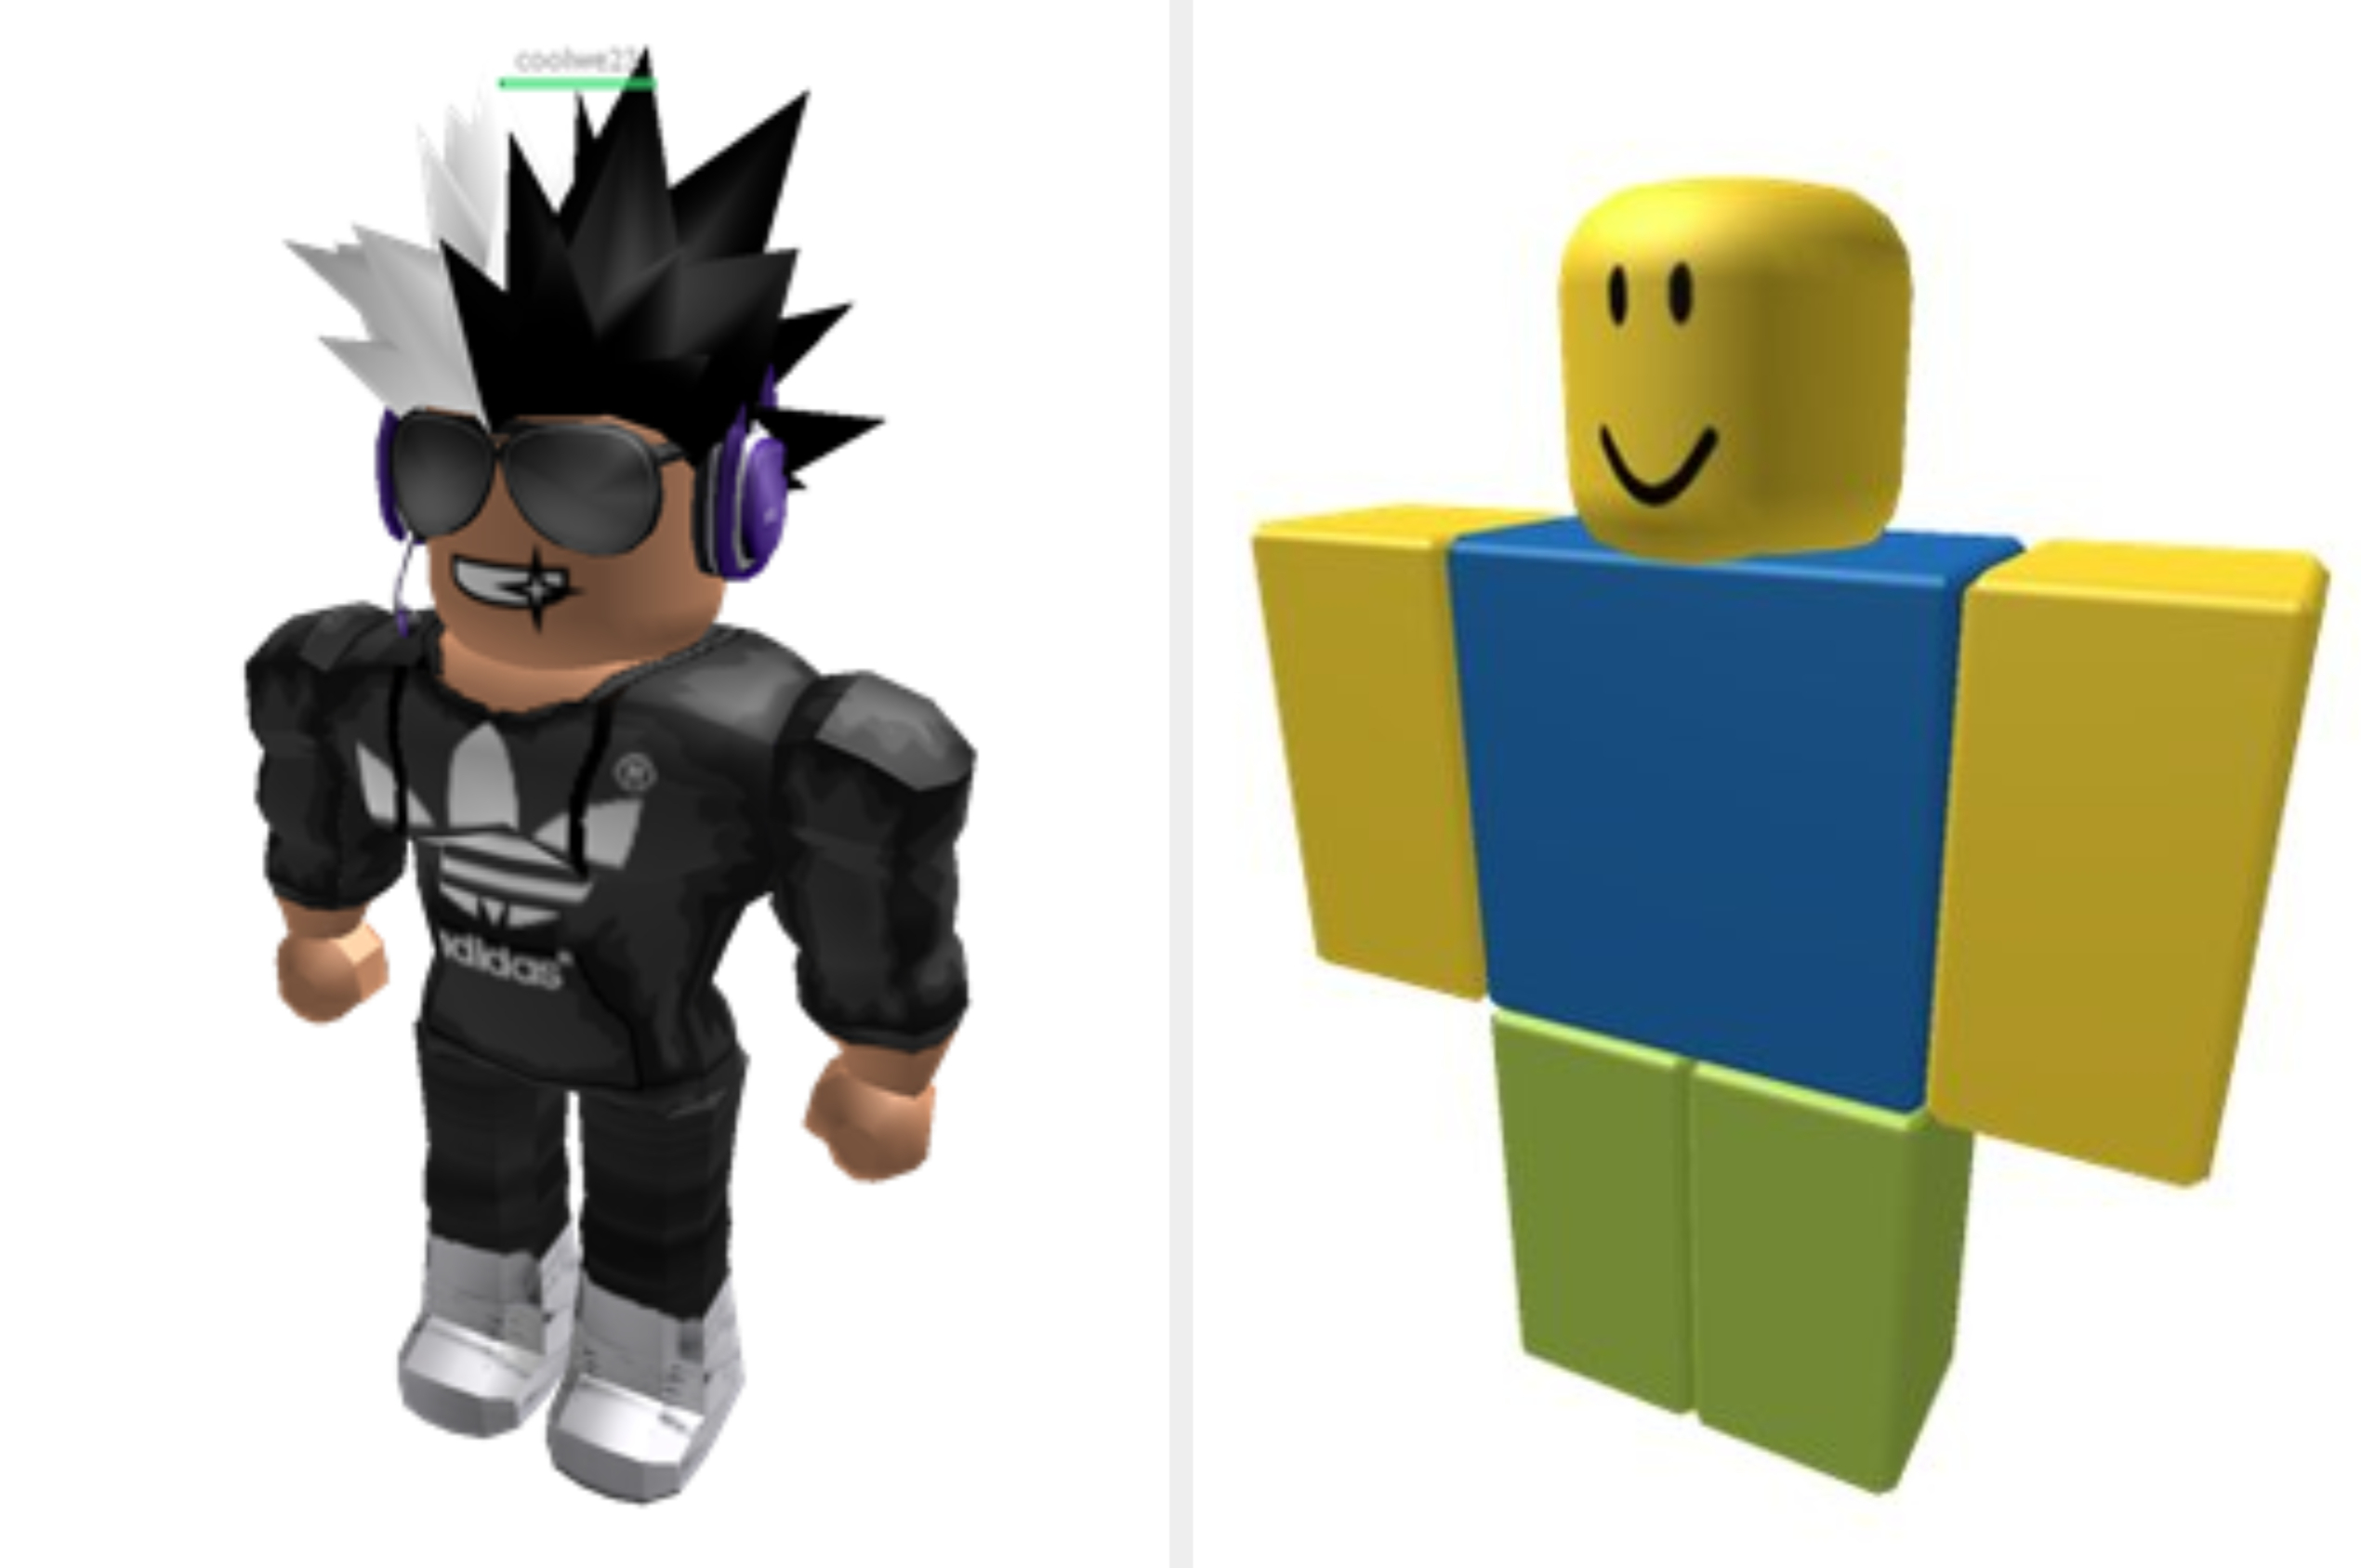 Roblox Quiz: What Kind Of Player Are You?